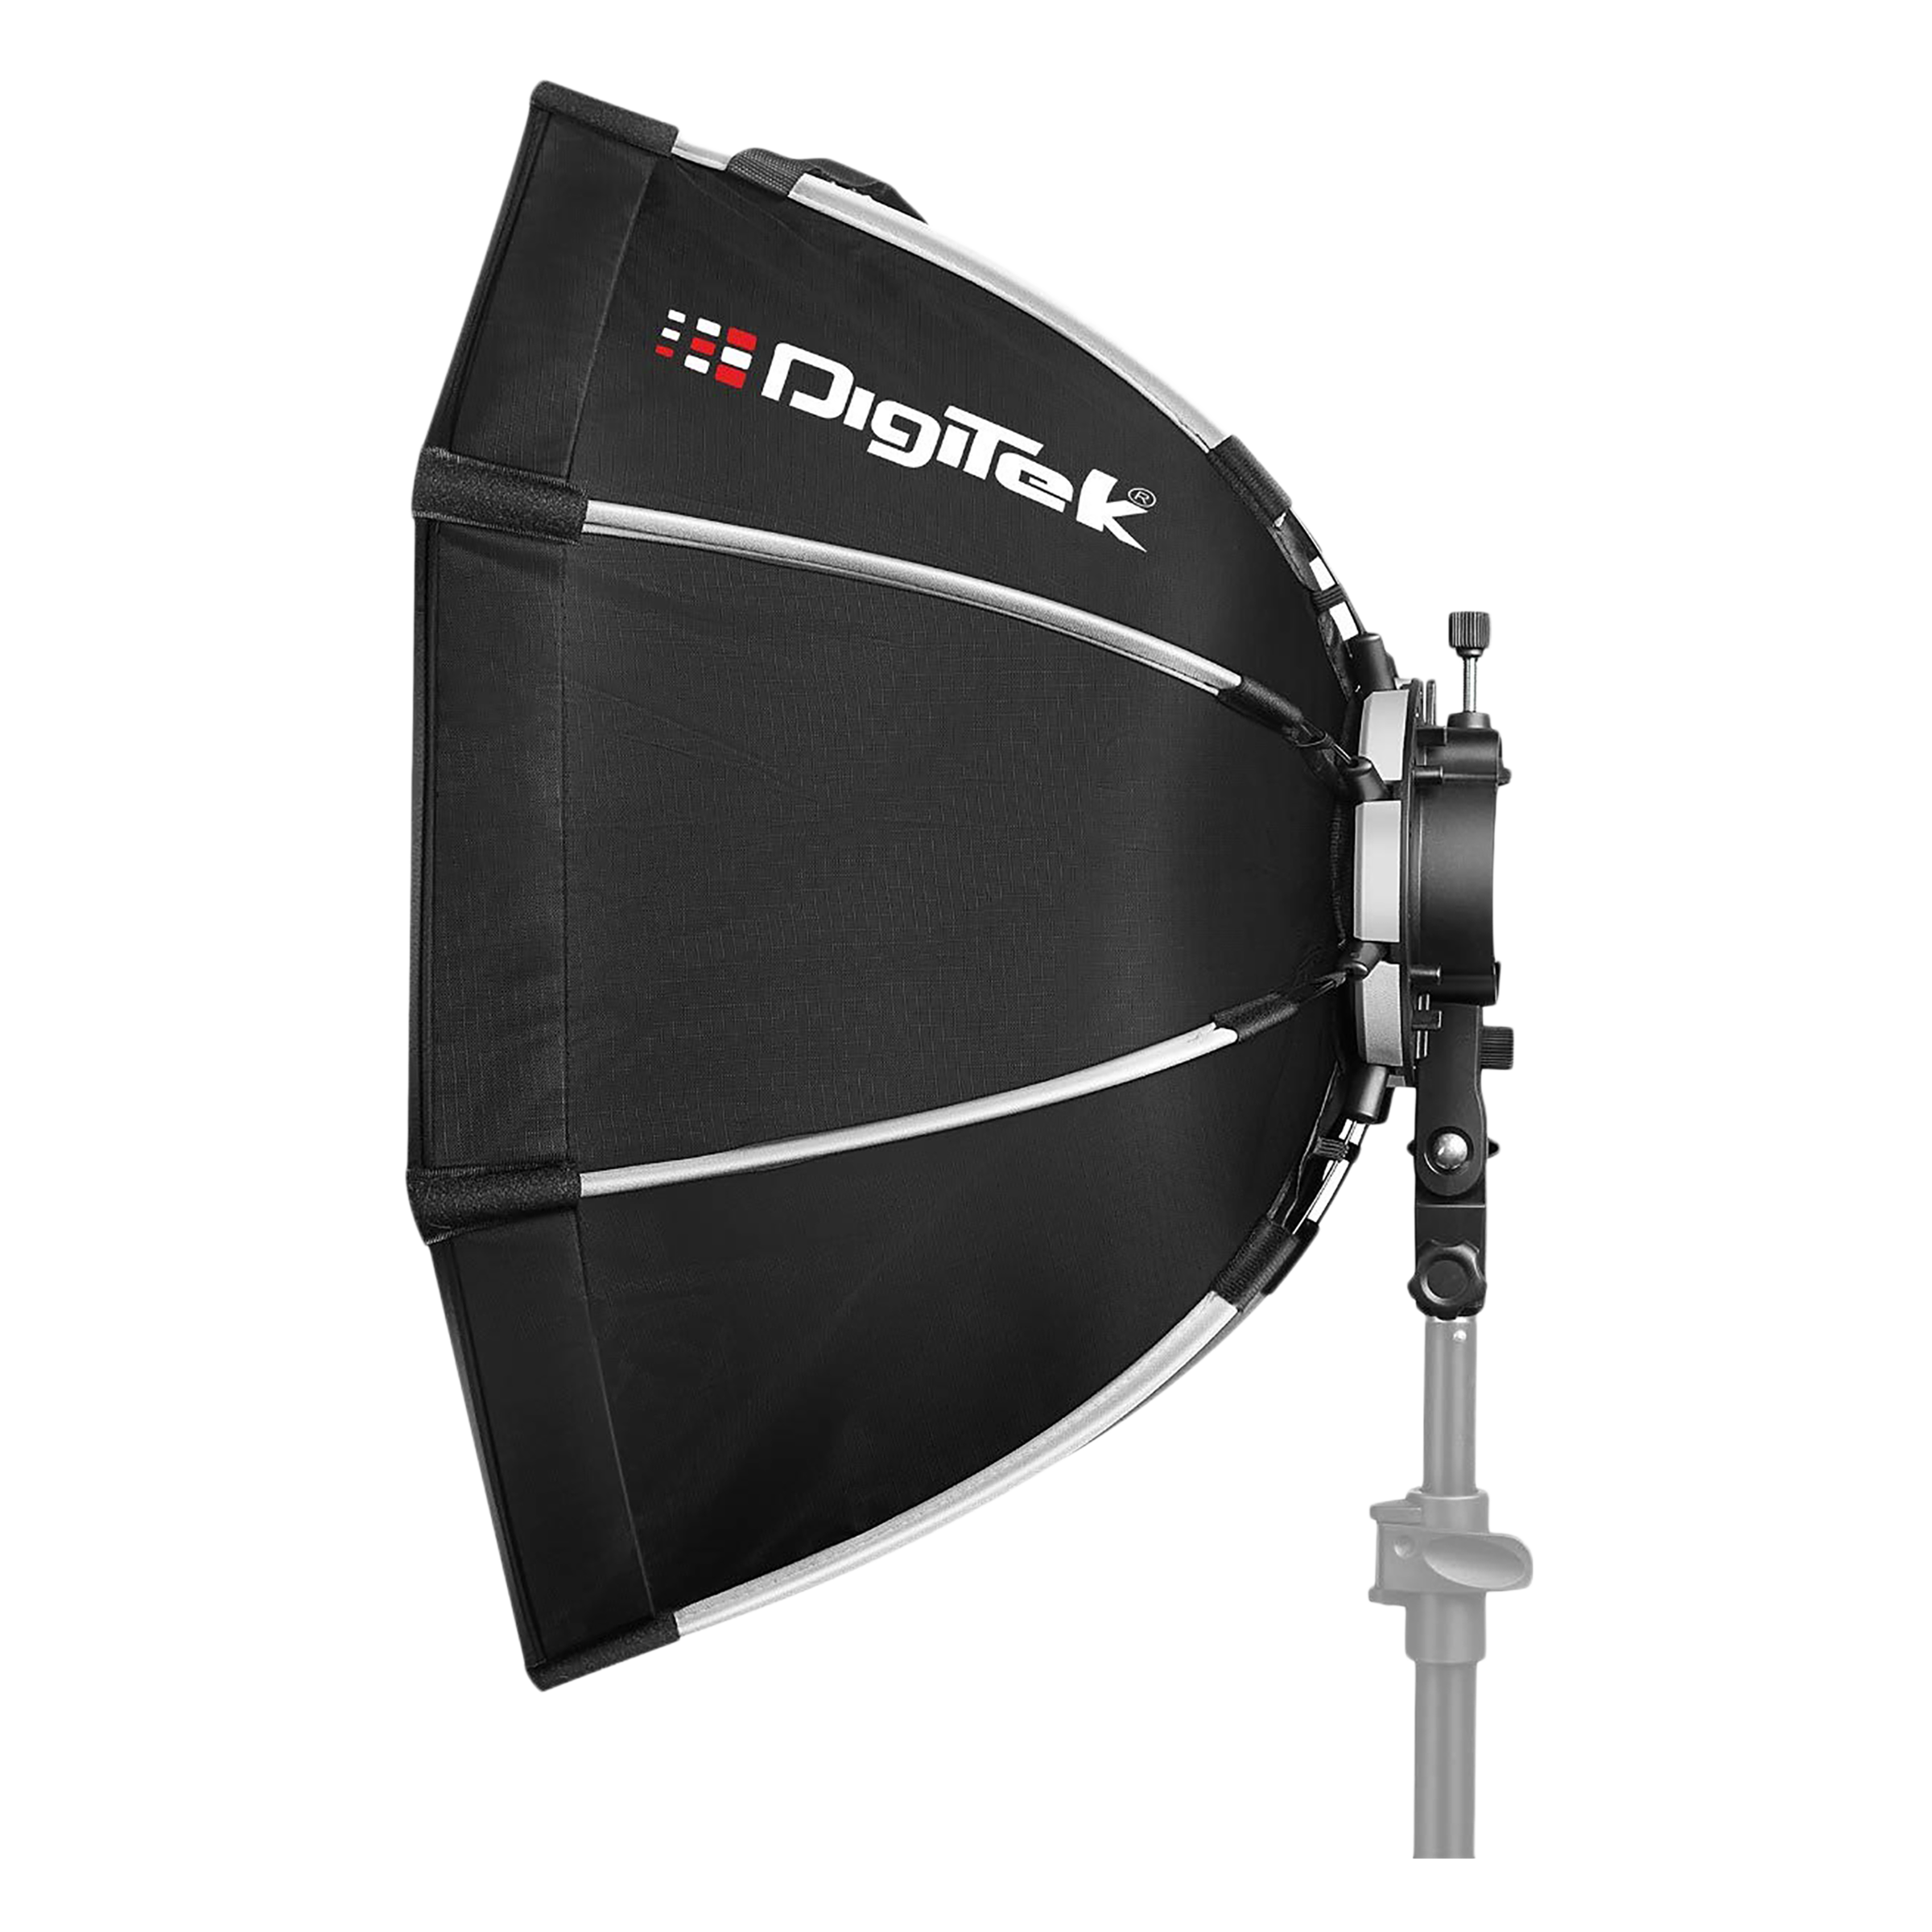 DigiTek DSBH-055 Softbox with S2 Type Bracket, 2 Diffuser Sheets & Carrying Case for All Flash Speedlights (Lightweight & Portable)